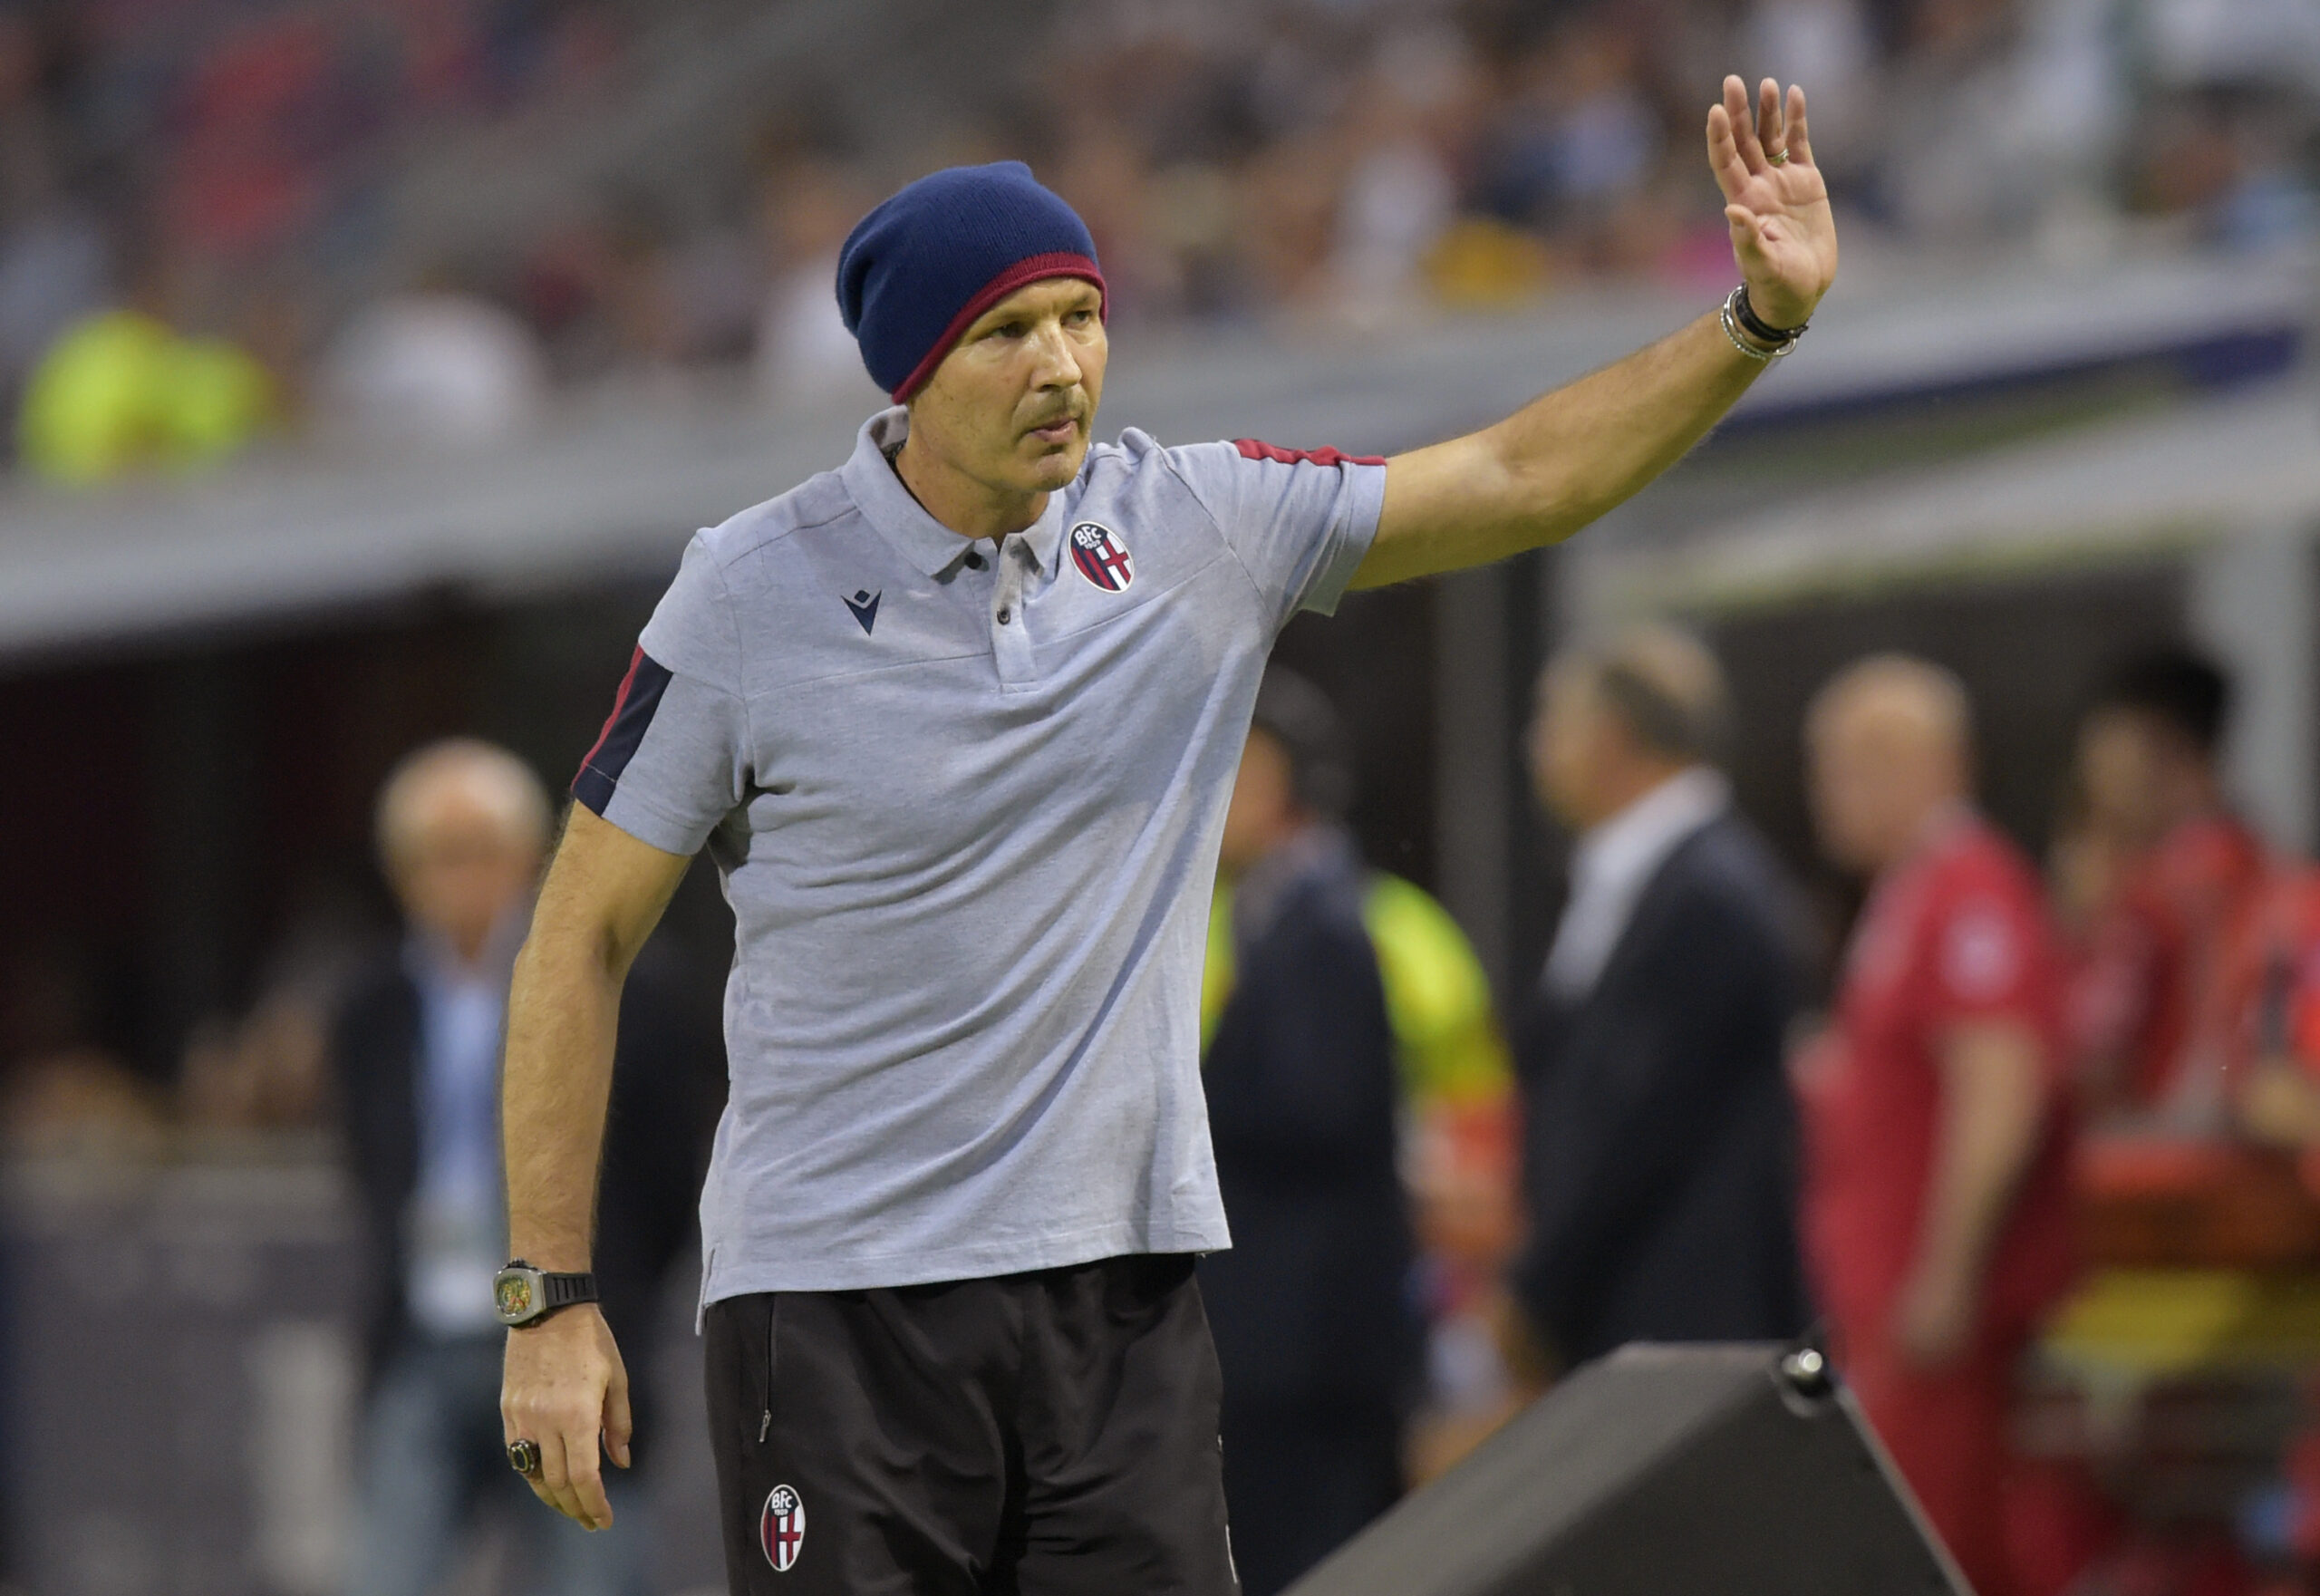 Bologna coach Sinisa Mihajlovic waves supporters during the Serie A soccer match between Bologna and Spal at the Dall'Ara stadium, in Bologna, Italy, Friday, Aug. 30, 2019. (AP Photo/Marco Vasini)